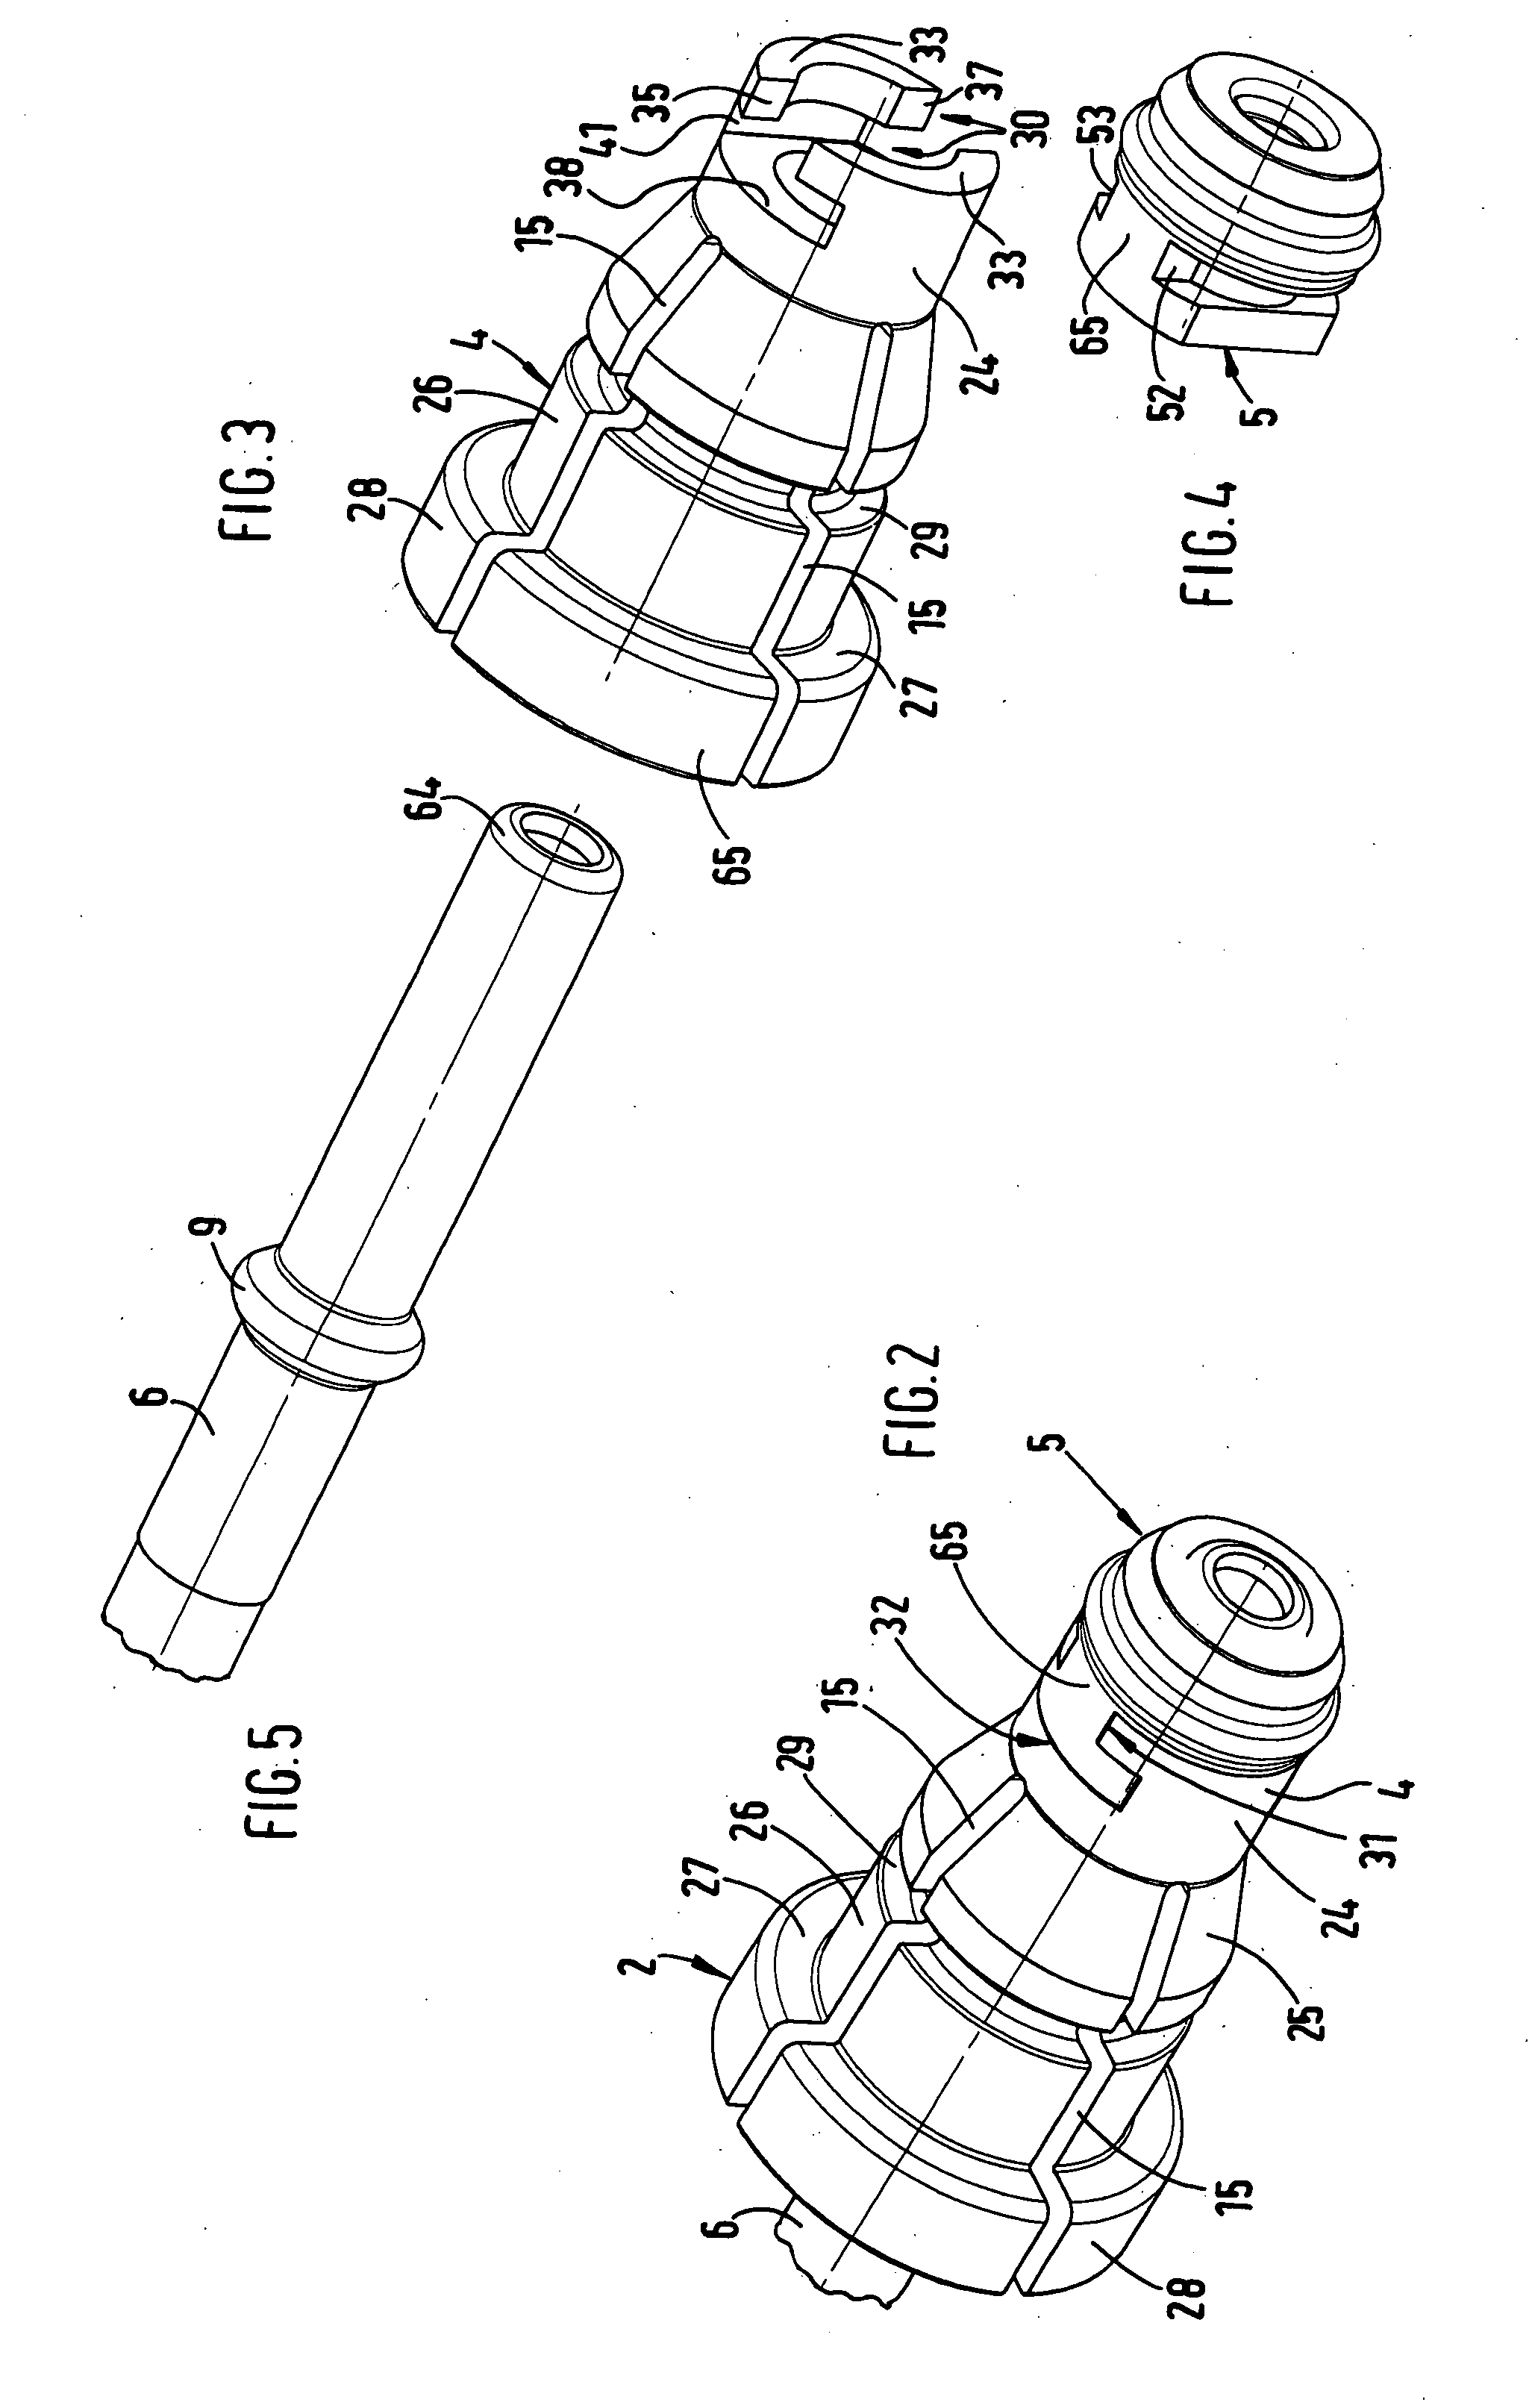 Sealing arrangement for a hydraulic plug-in connection